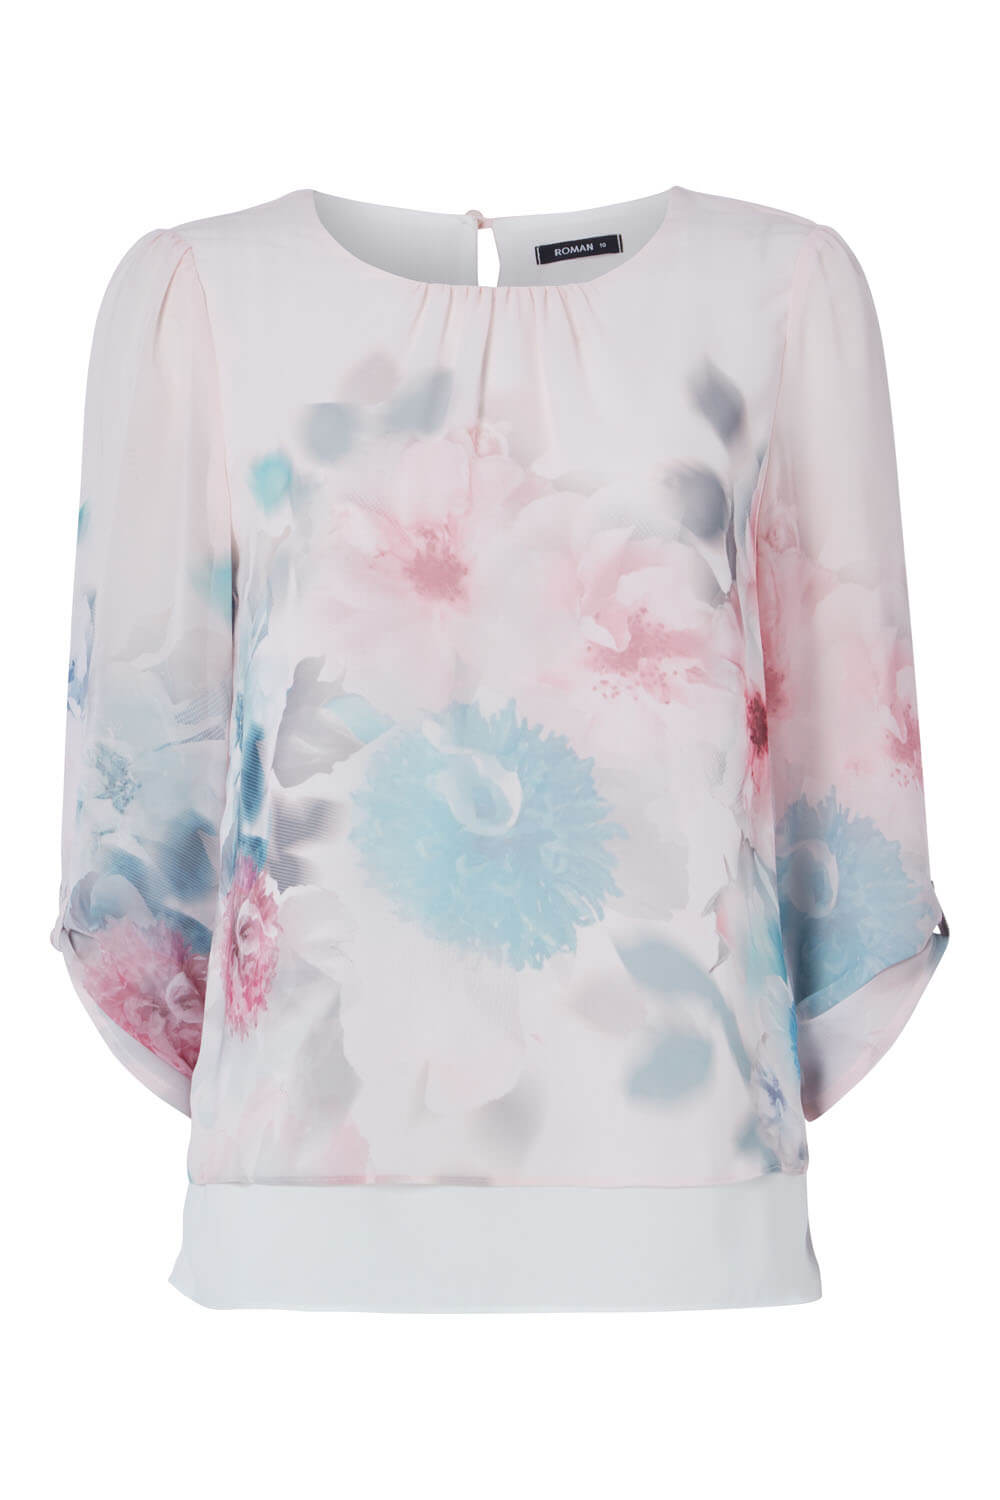 Light Pink Floral Overlay Top, Image 4 of 8